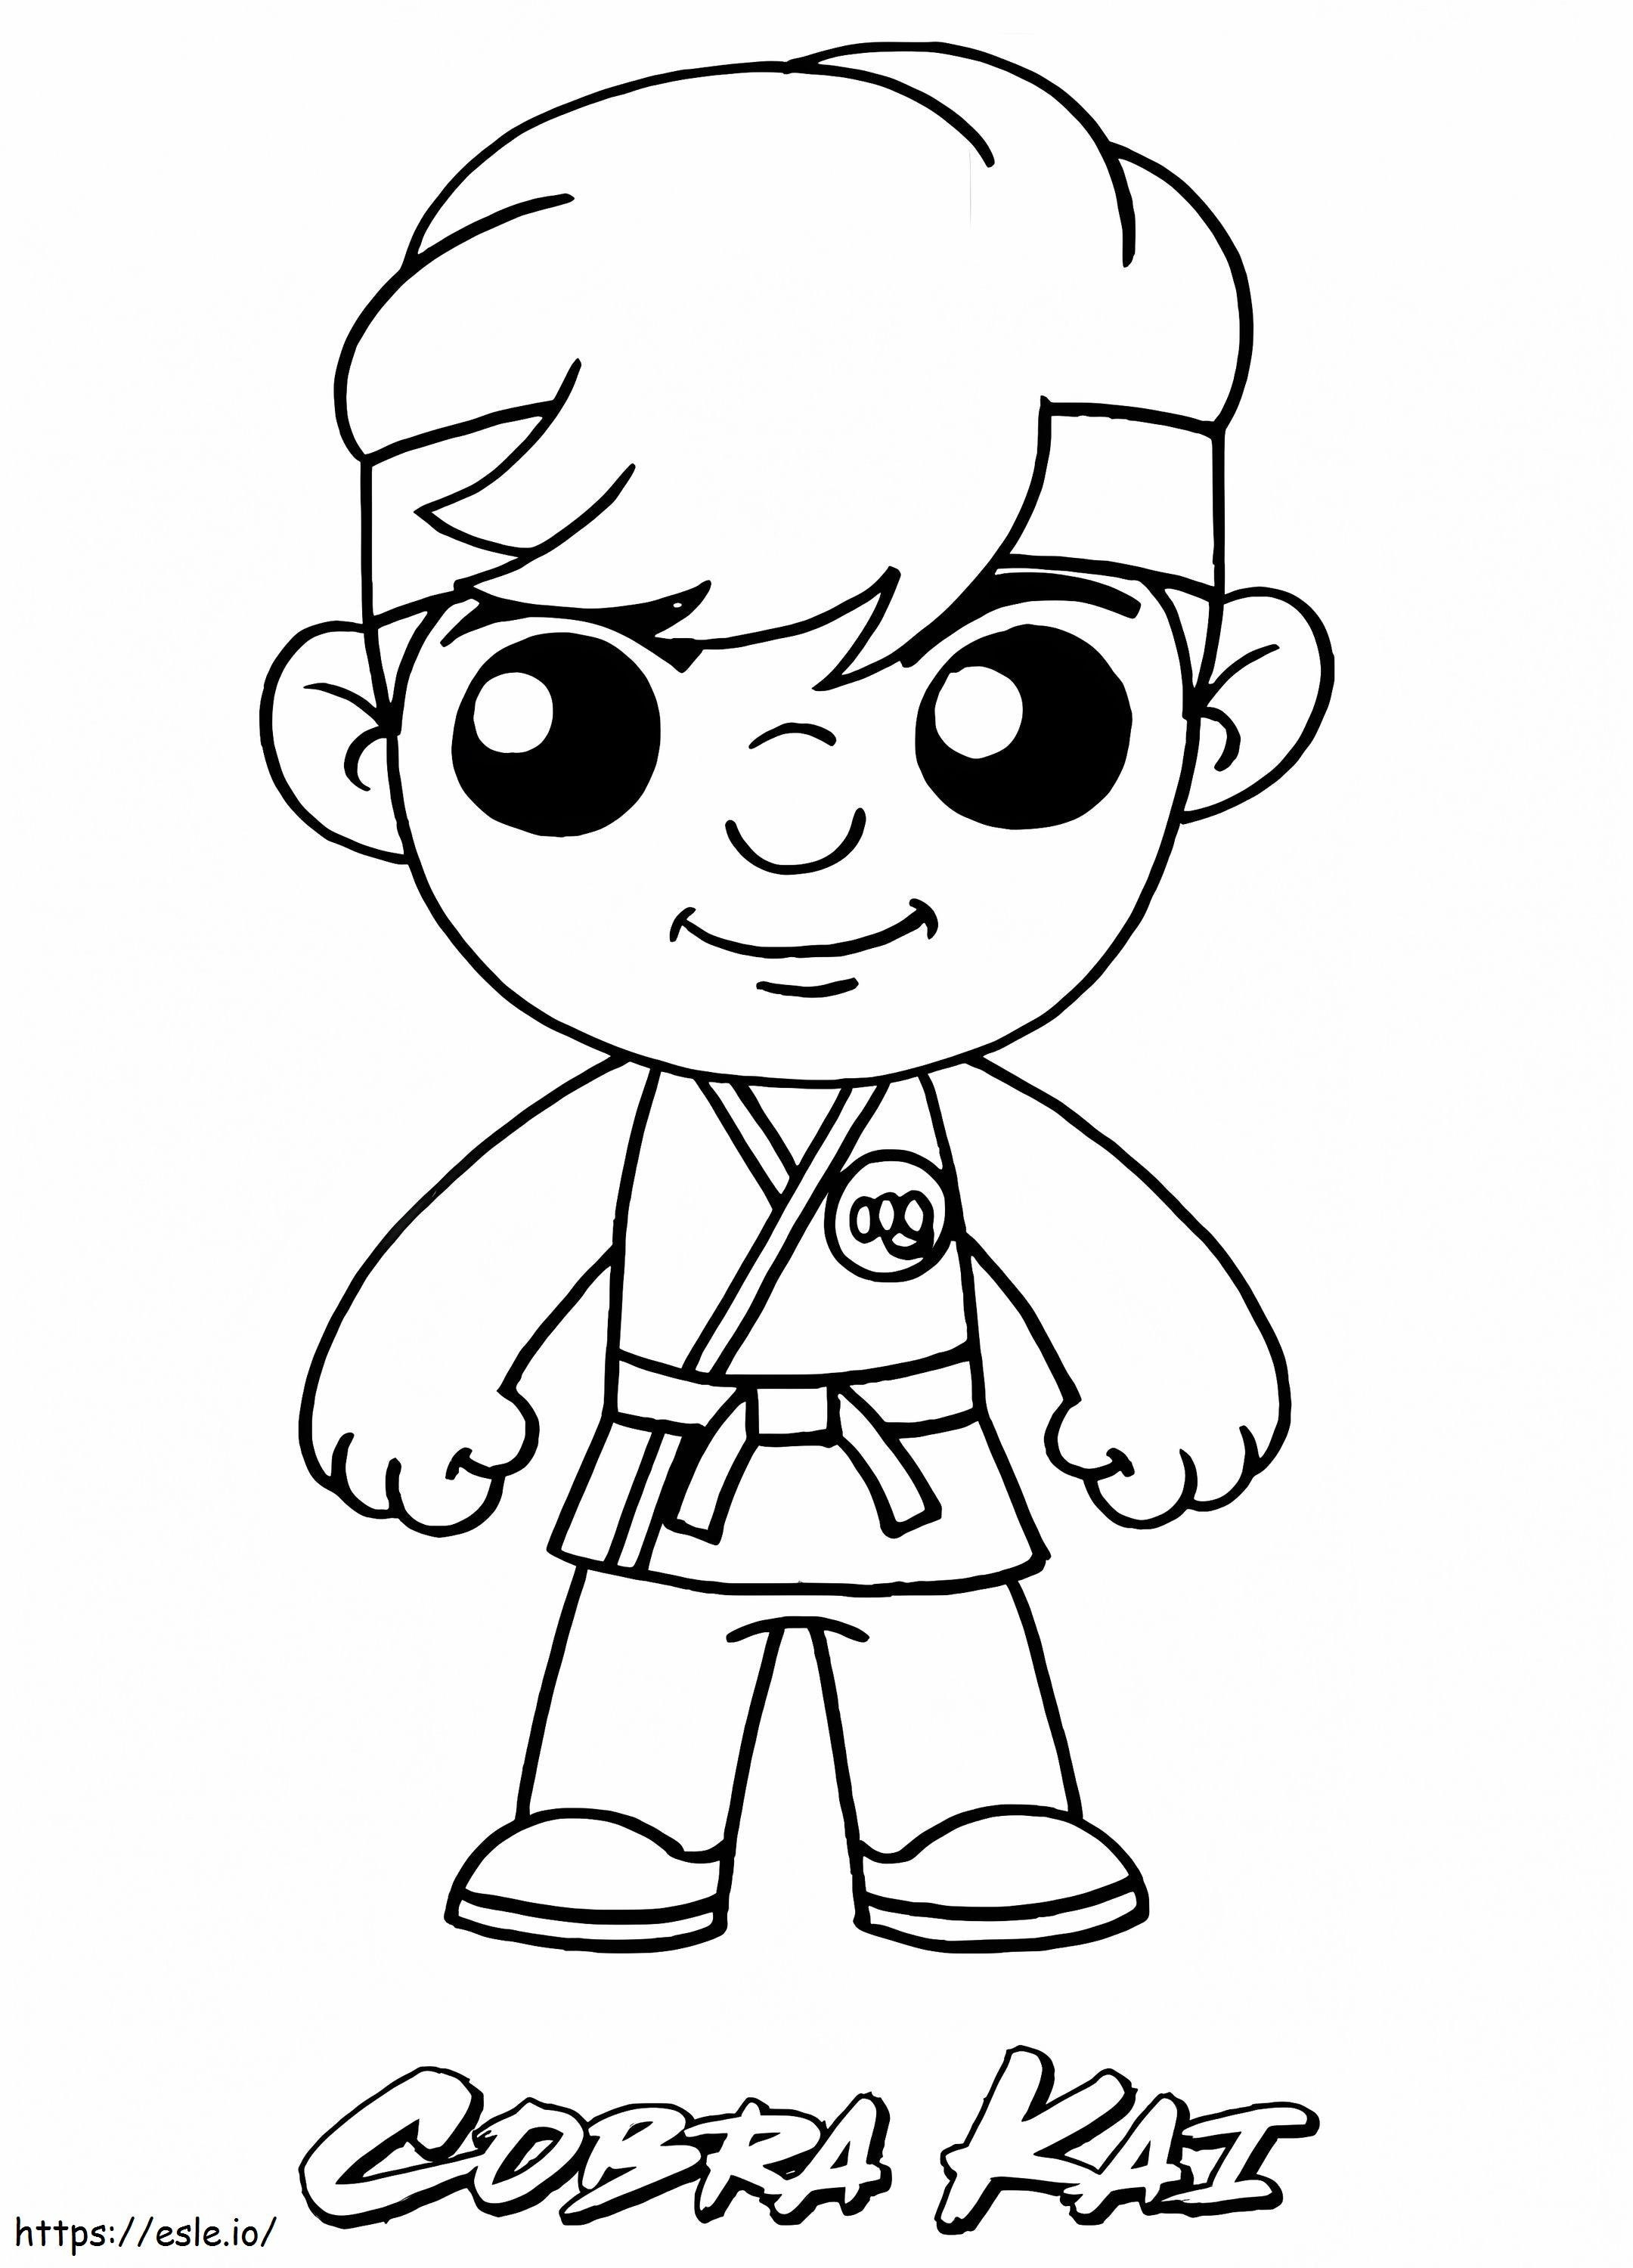 Chibi Johnny Lawrence coloring page